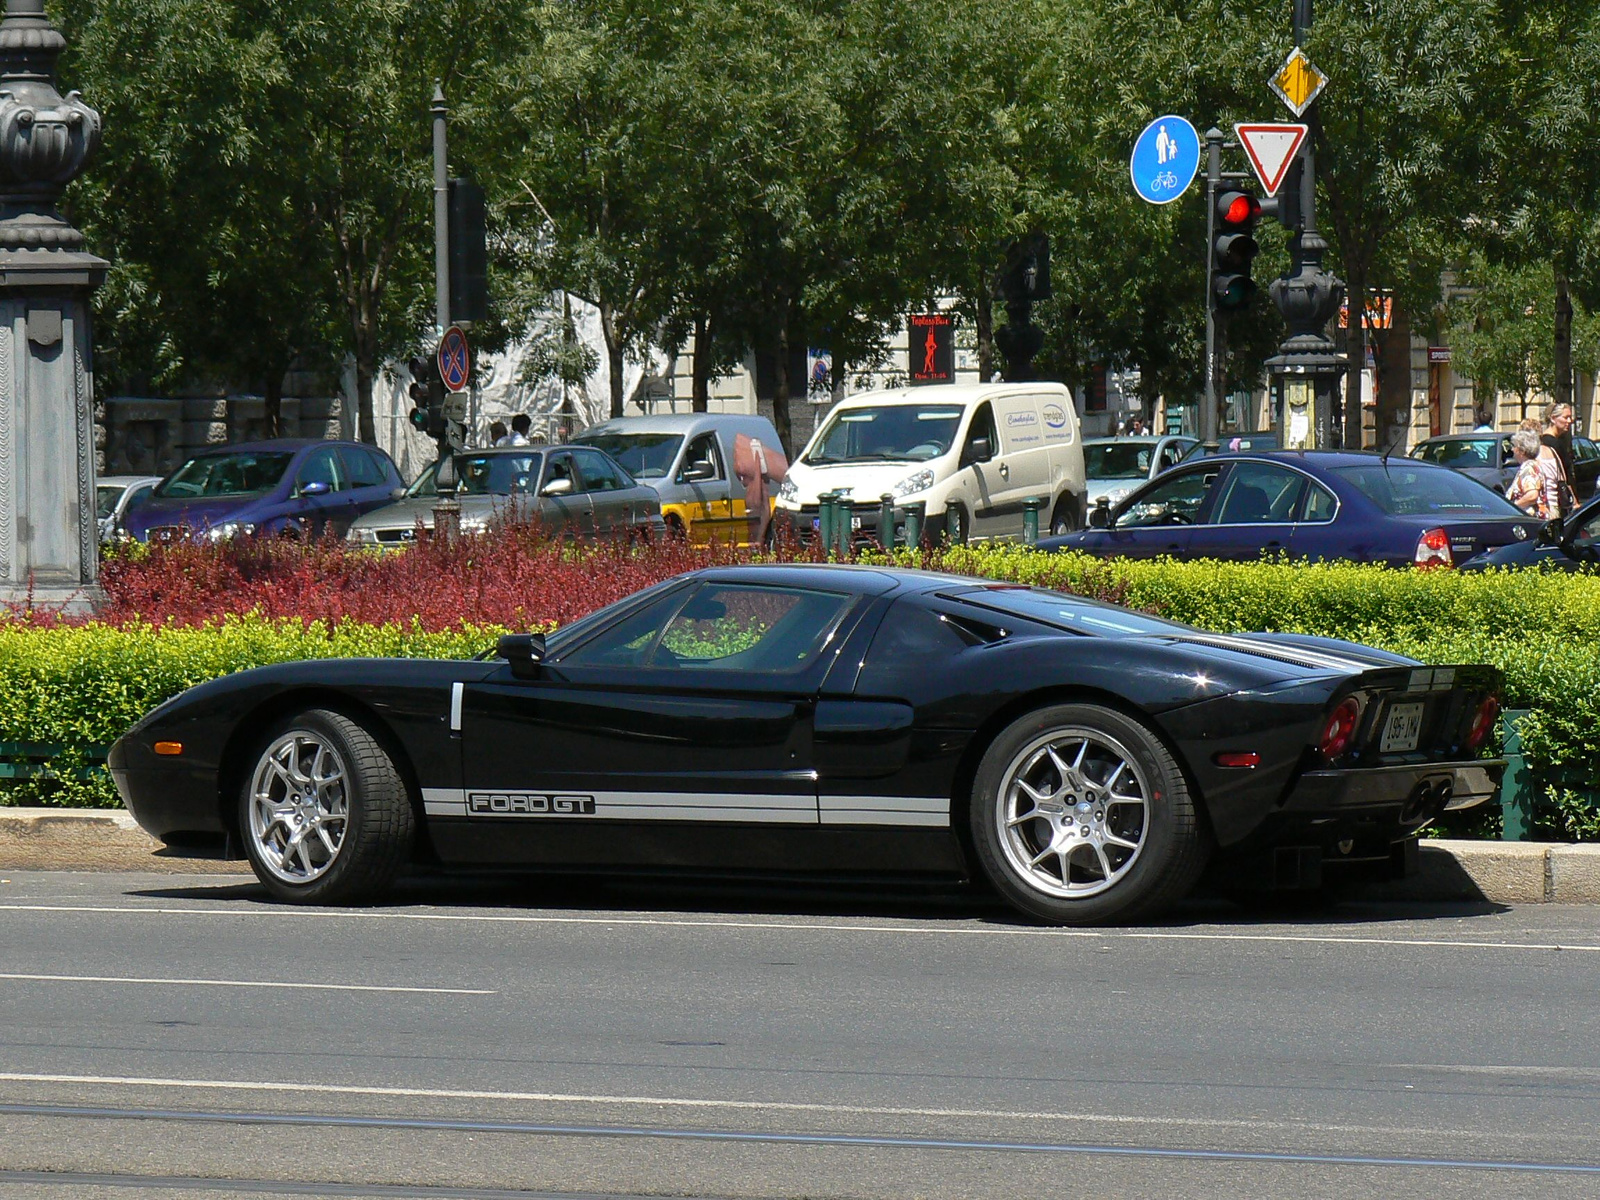 Ford GT 012